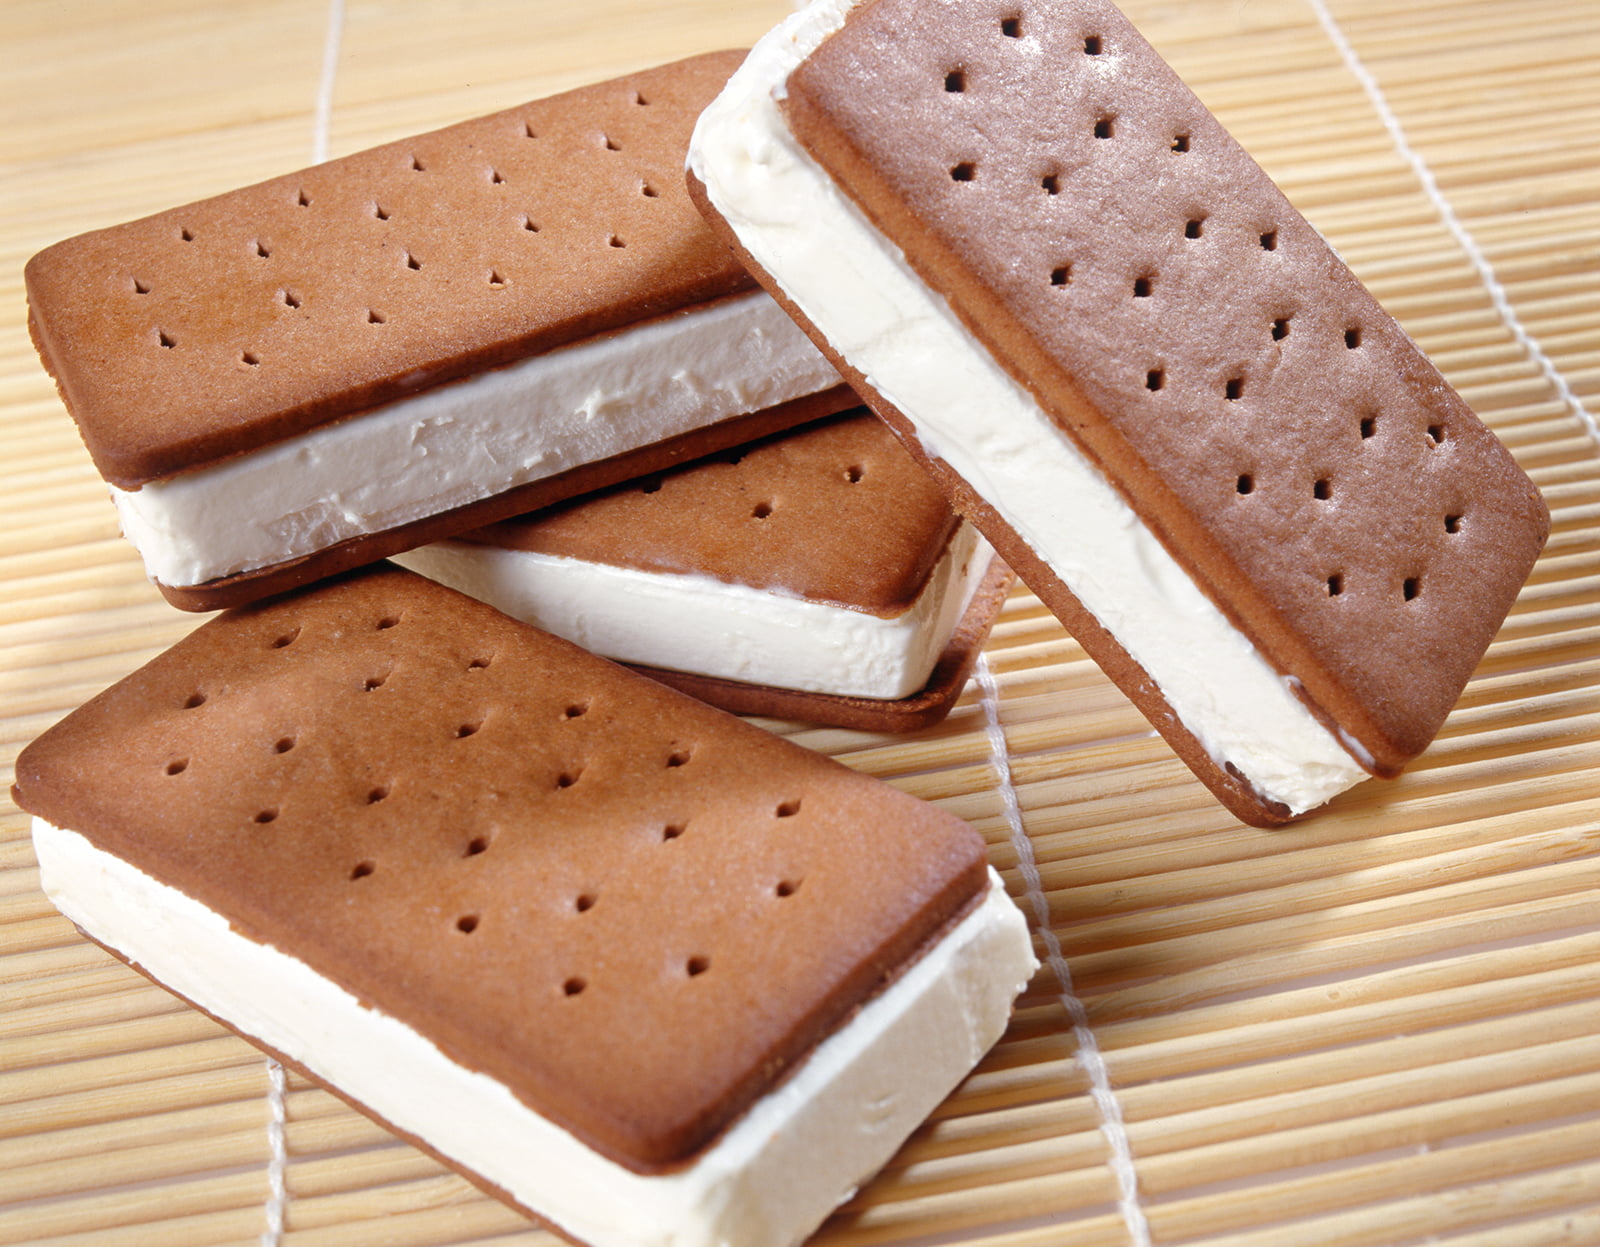 https://facts.net/wp-content/uploads/2023/07/12-facts-about-national-ice-cream-sandwich-day-1690816408.jpg